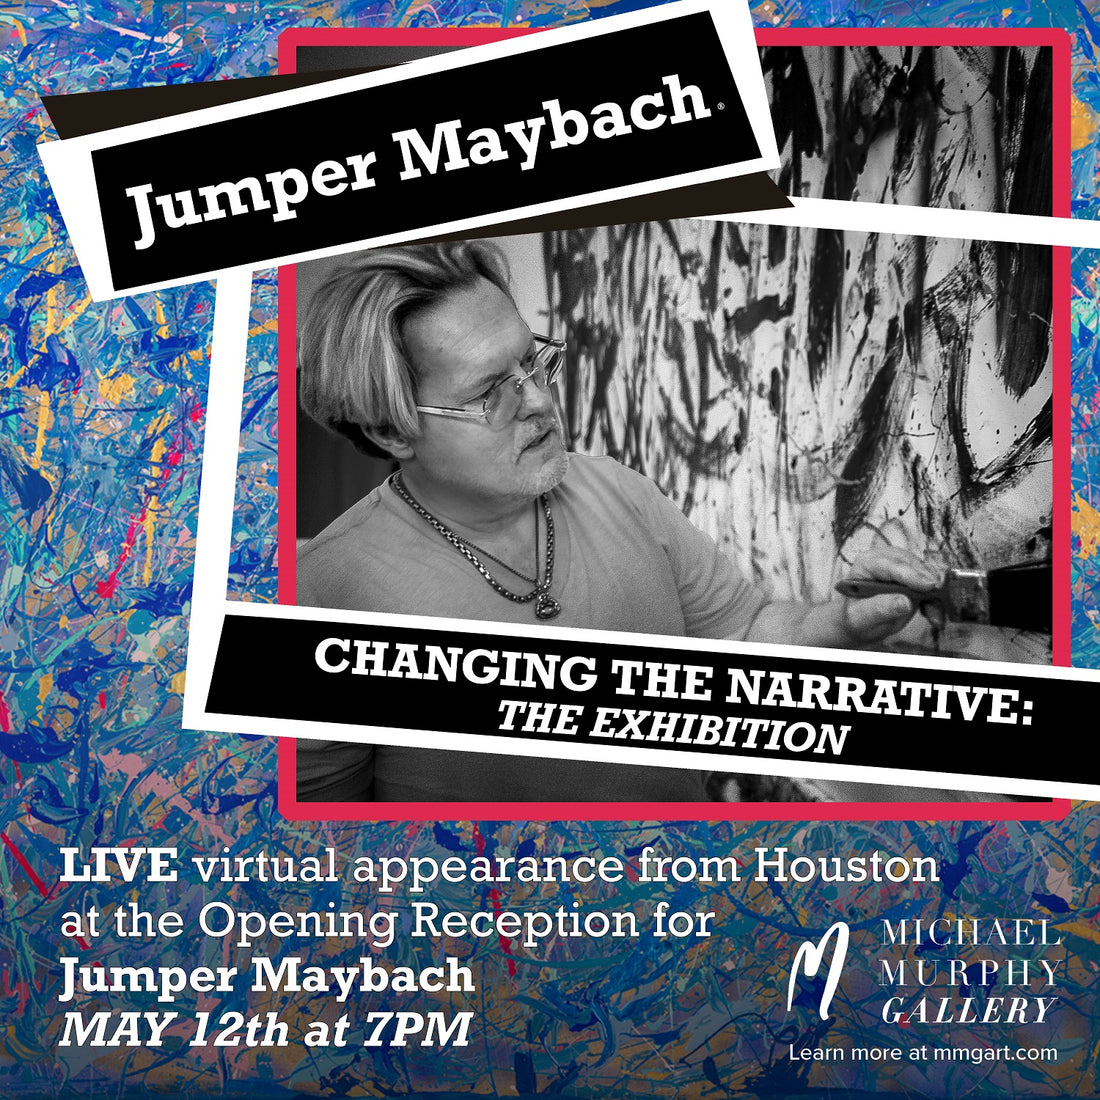 TBN Weekly - Jumper Maybach Brings “Changing the Narrative” Exhibition to Tampa